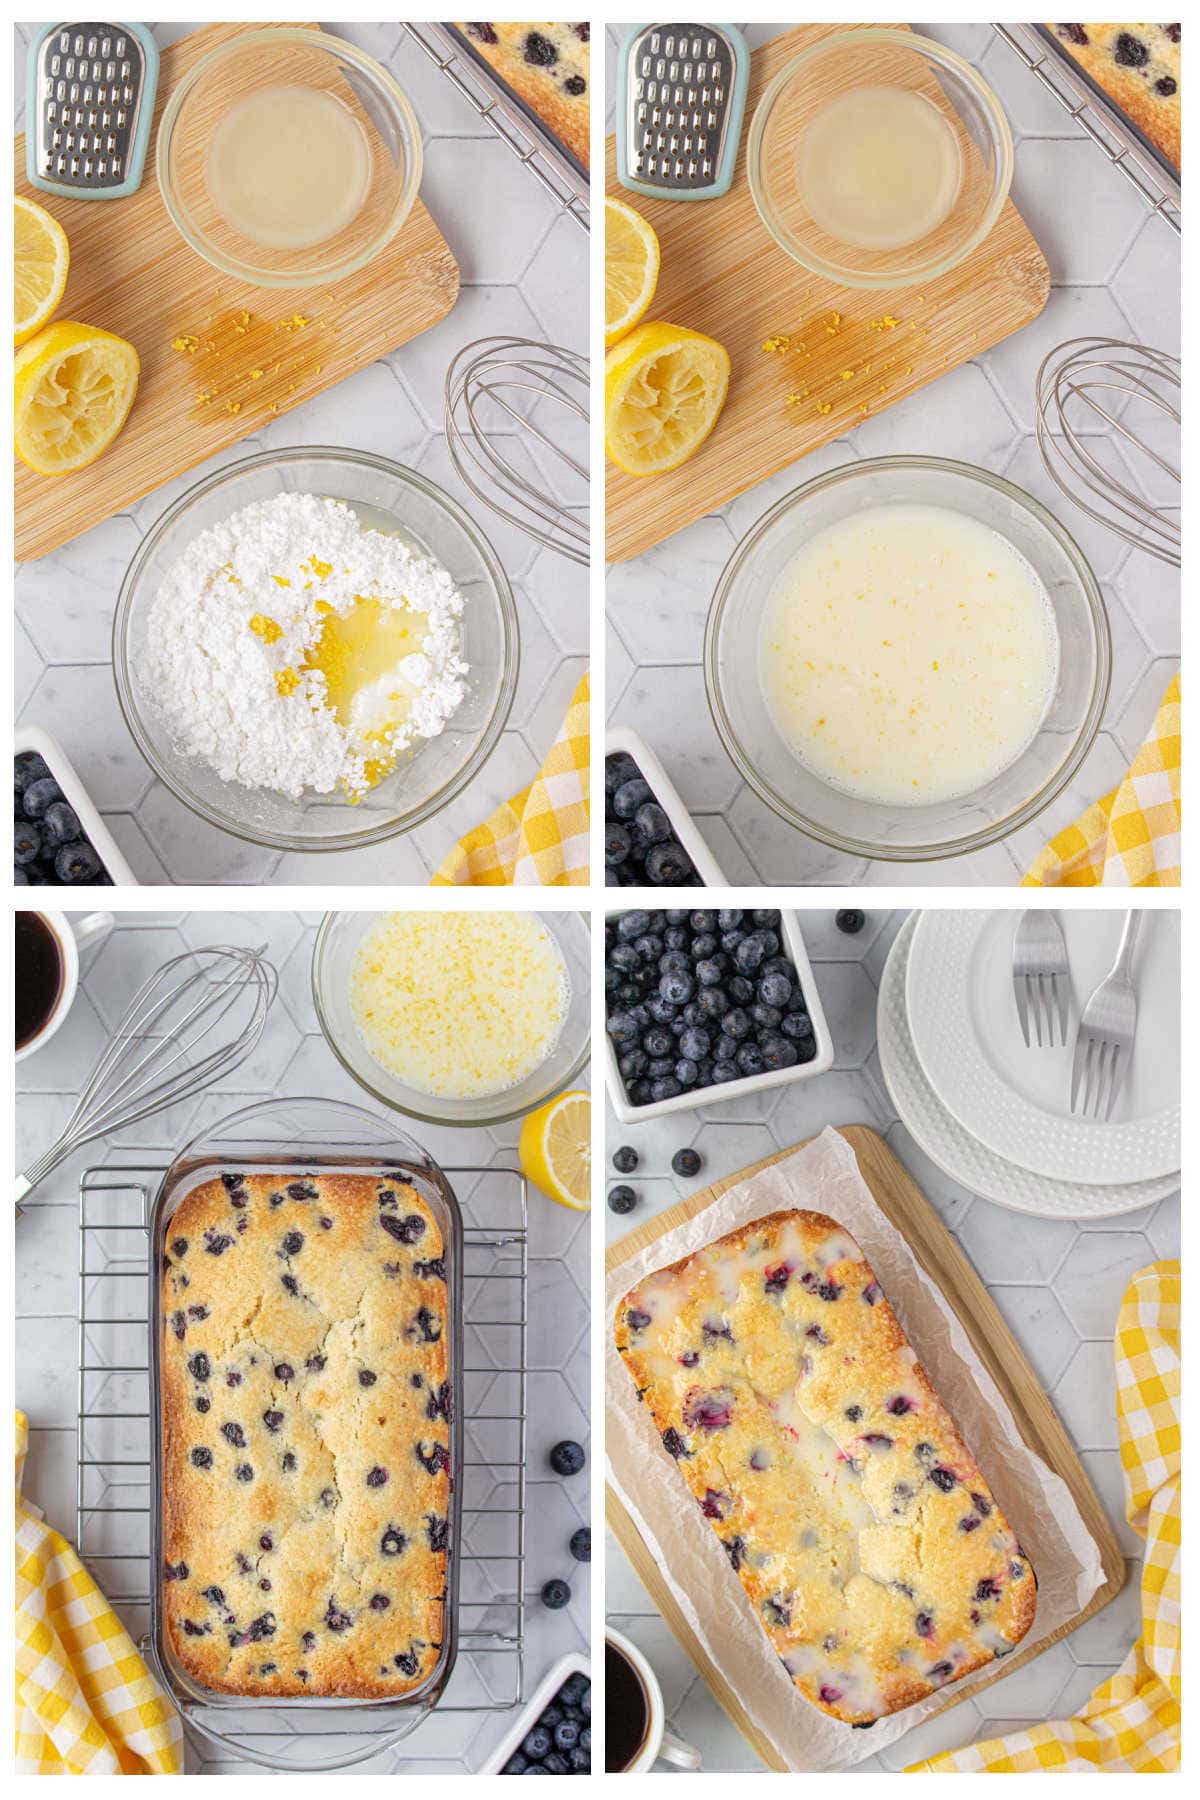 Step by step images showing how to make the glaze for lemon blueberry bread.